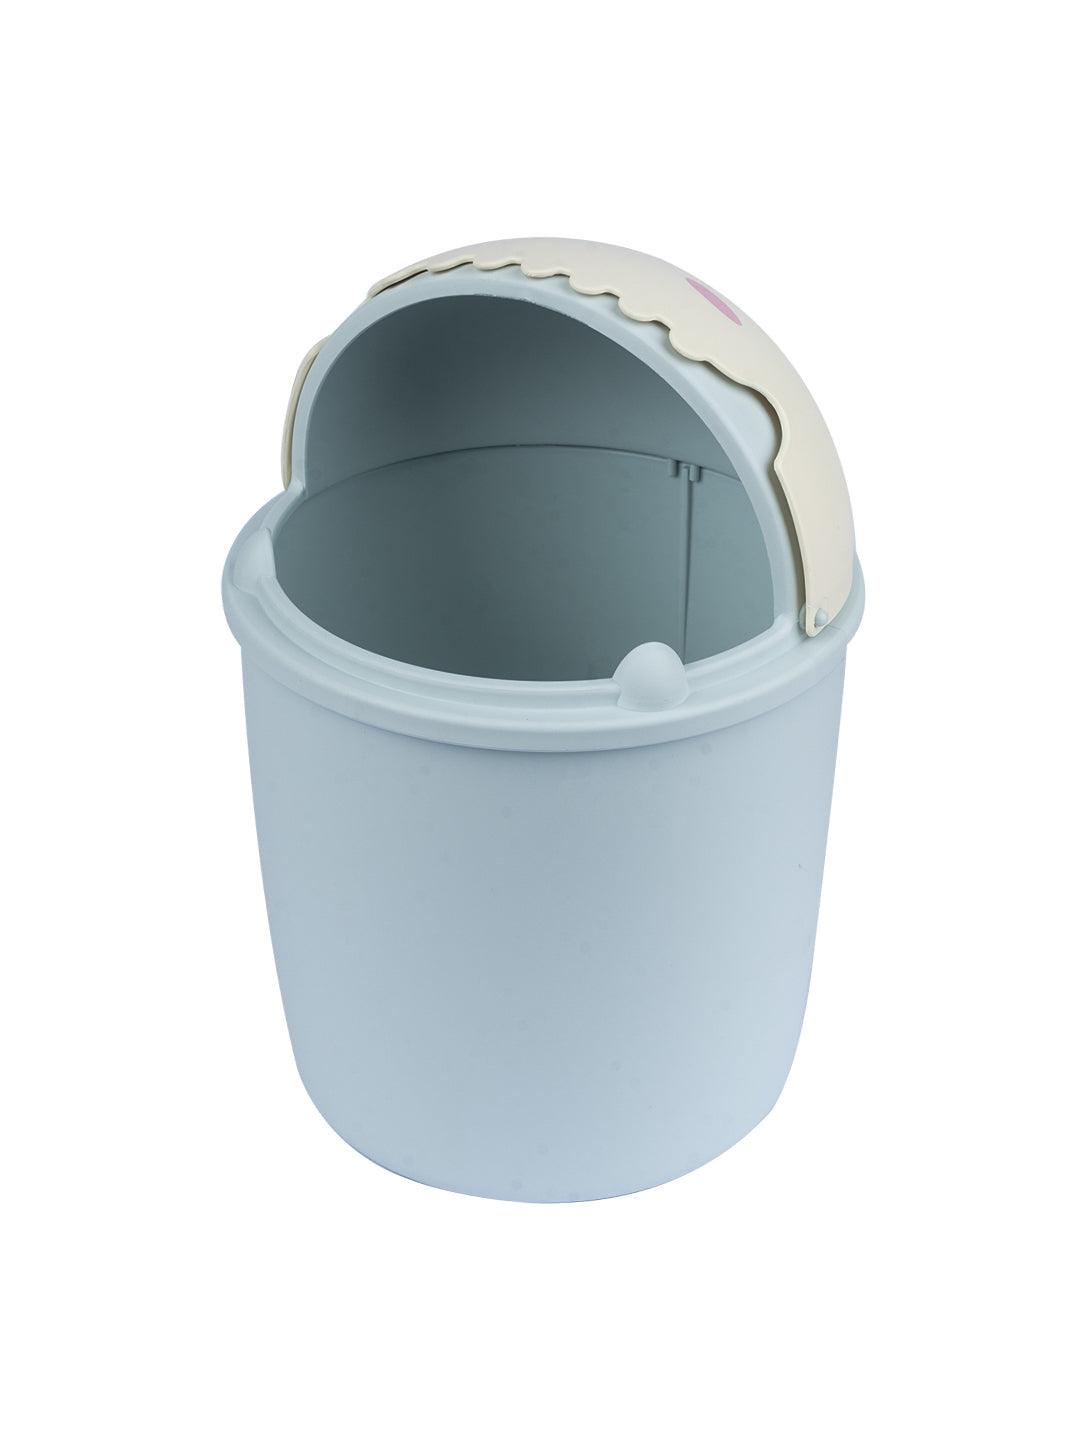 Cyan Tabletop Dustbin With Animated Character Lid